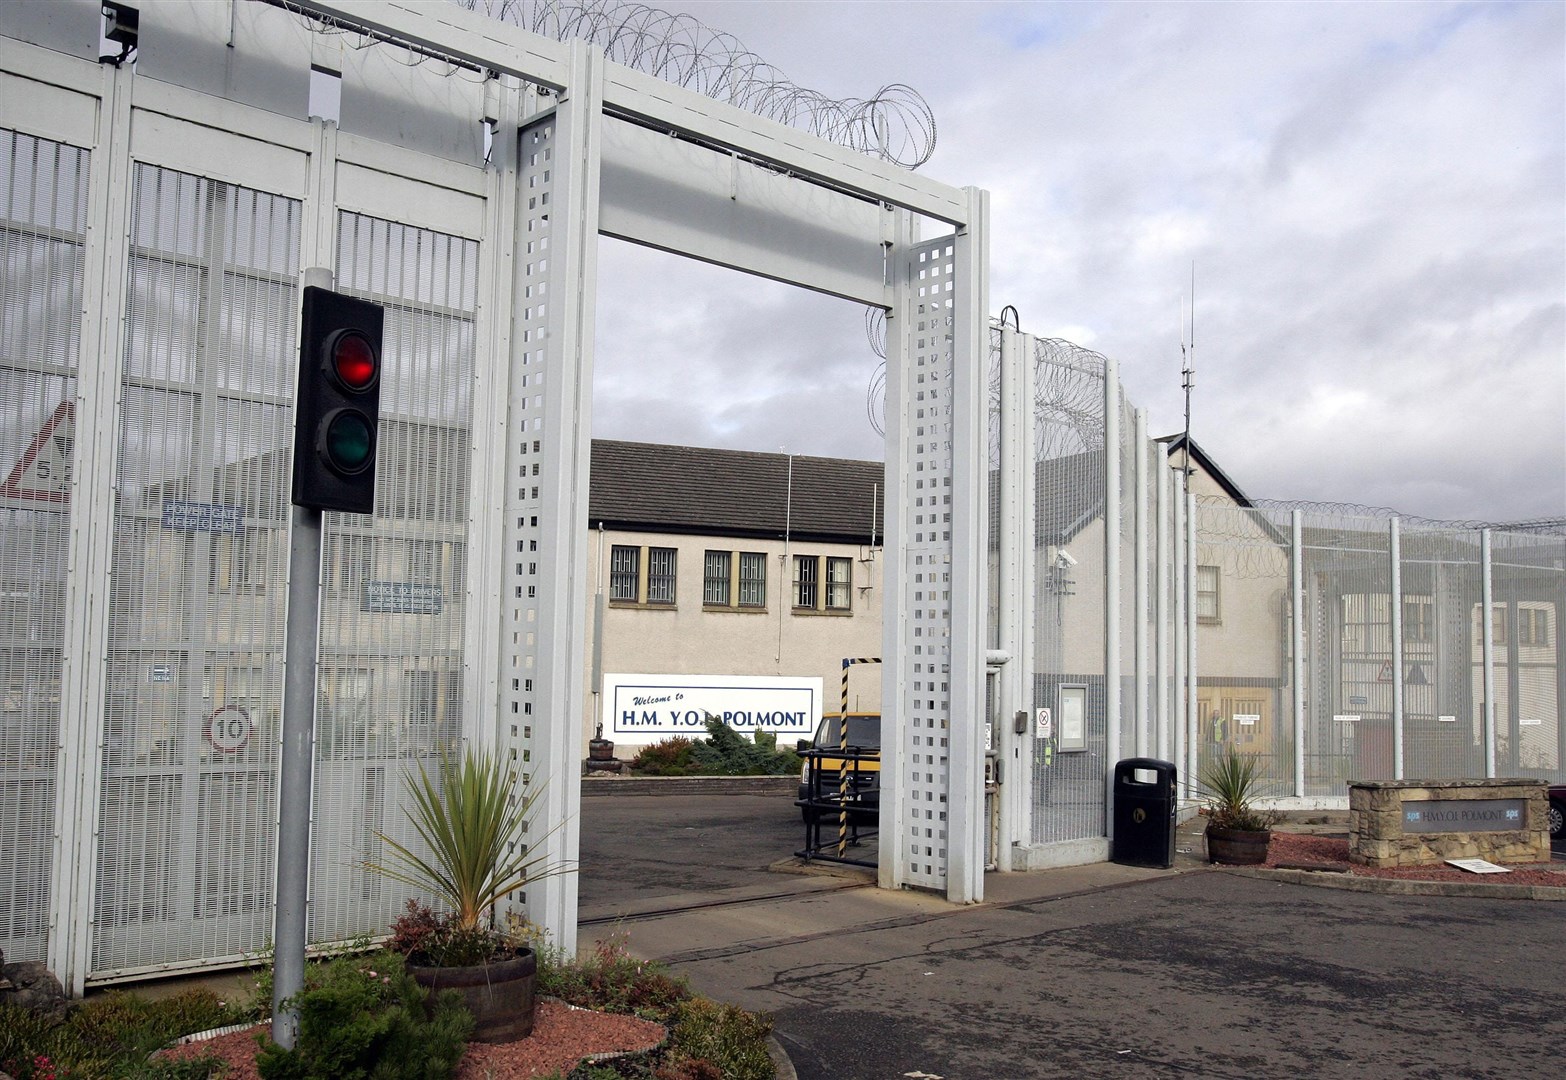 The two young people were being held at Polmont Young Offenders Institution (Andrew Milligan/PA)